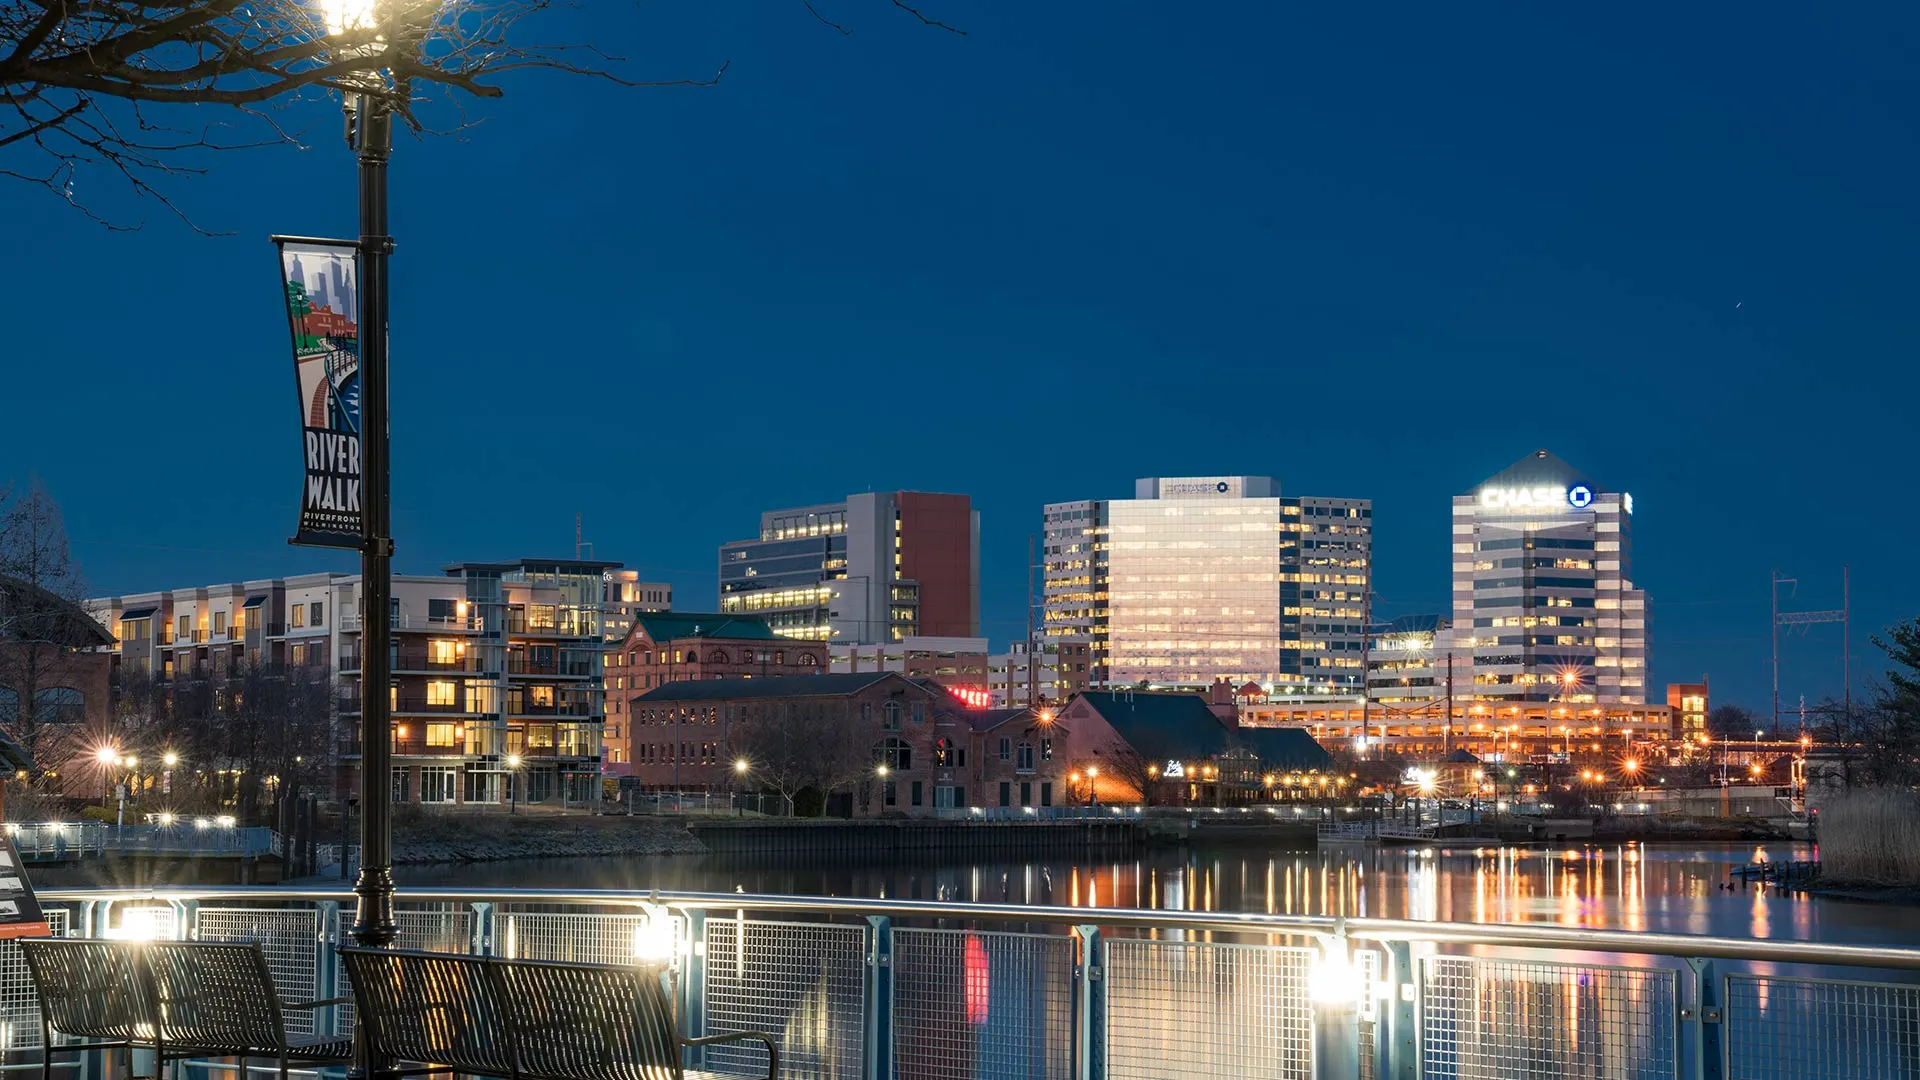 A great view of the Wilmington, DE city from across the river.